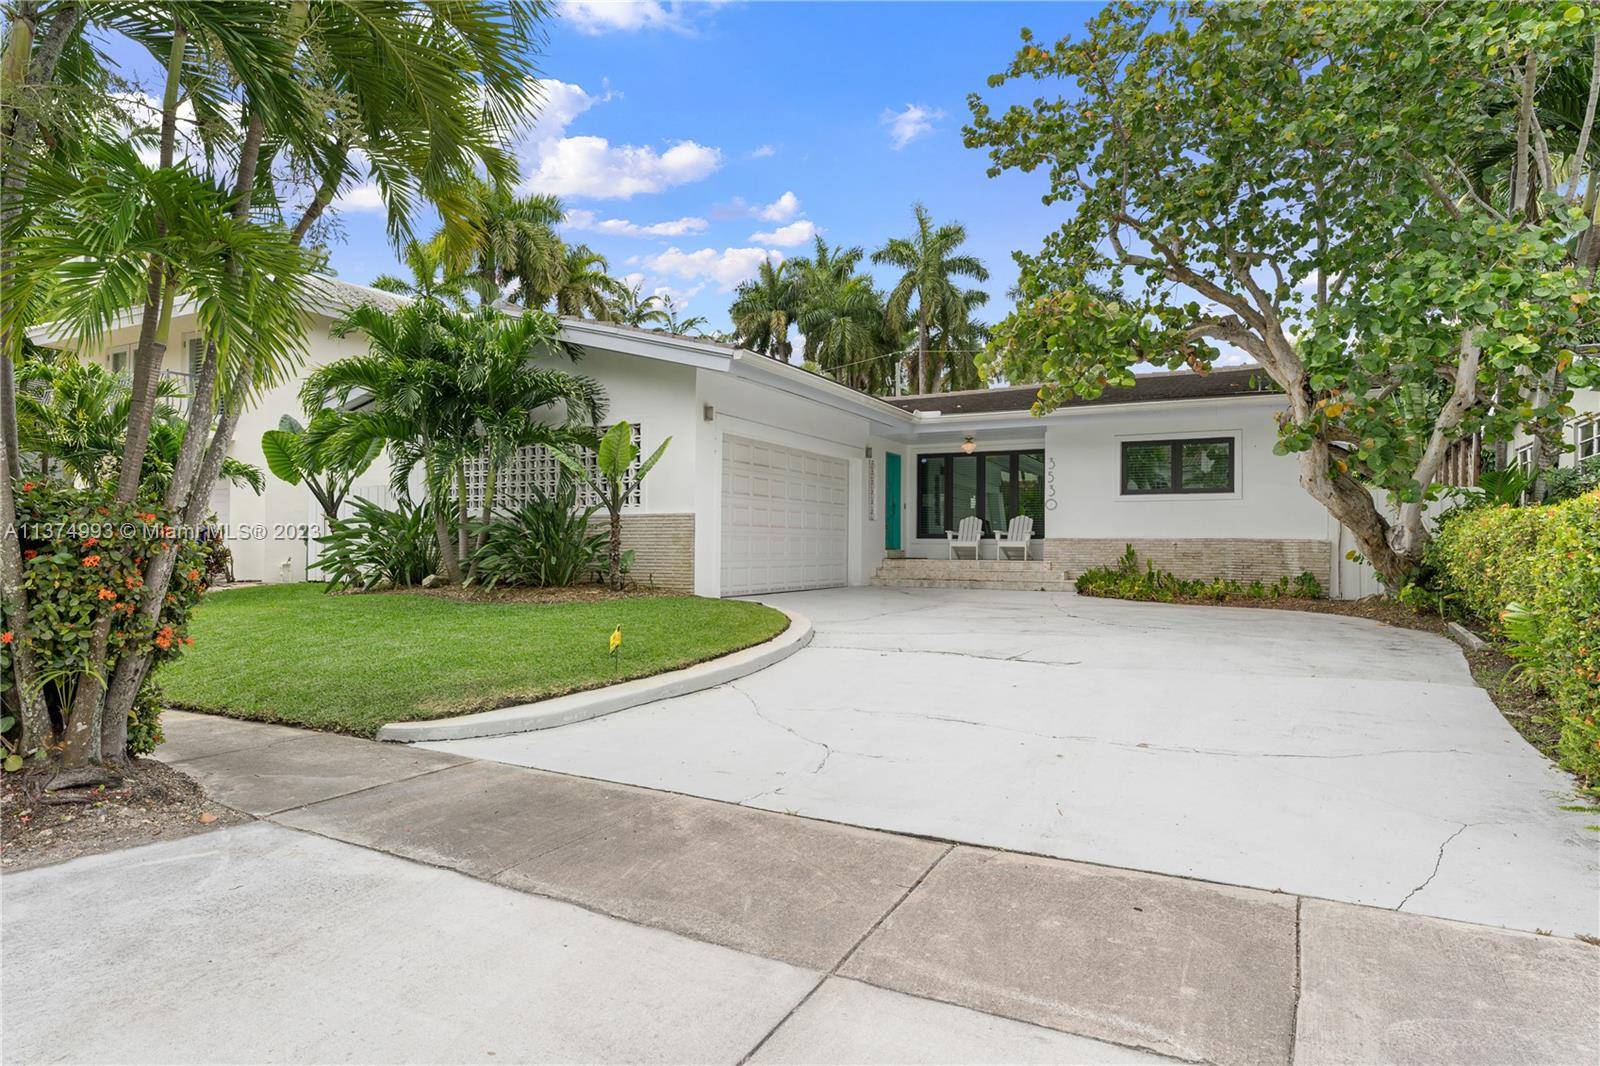 First time for sale, undergone comprehensive remodeling, re designed with the most detailed finishes, yet conserving the charm of a Coconut Grove home.